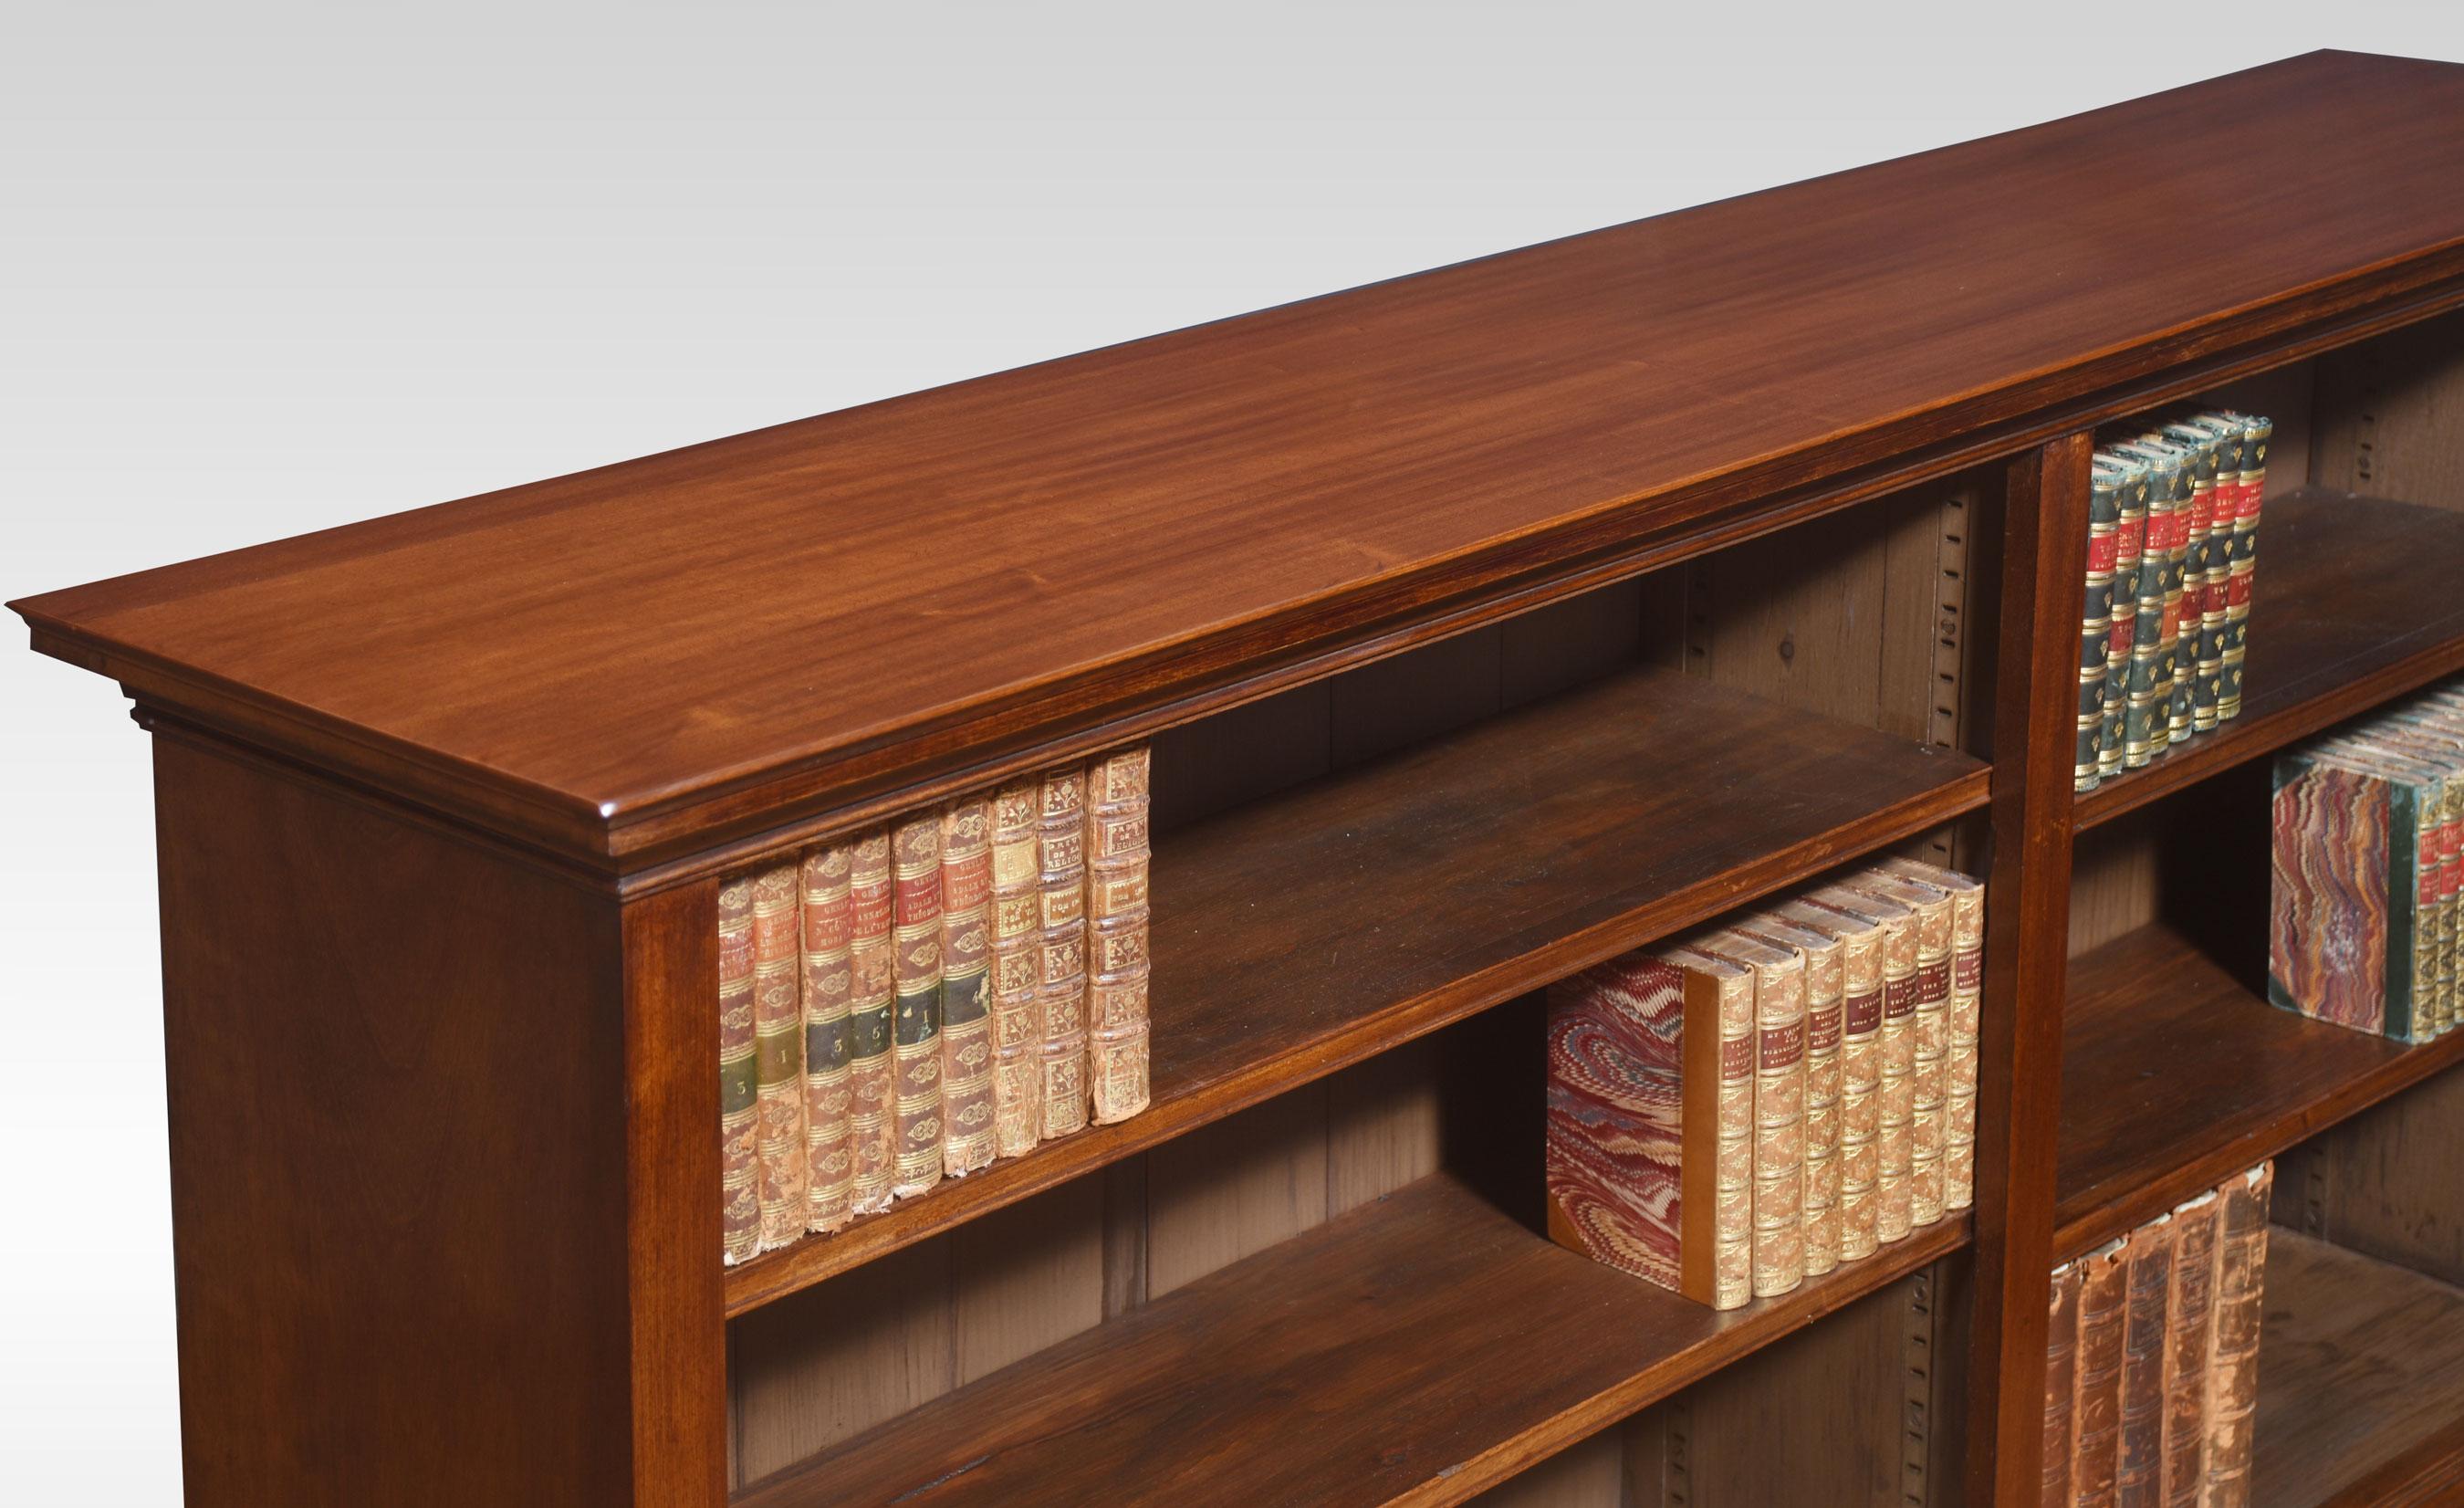 Pair of open bookcases, the large rectangular well-figured walnut tops. Above two bays of adjustable shelves divided by column. All raised on a plinth base.
Dimensions
Height 36.5 Inches
Width 71.5 Inches
Depth 15 Inches